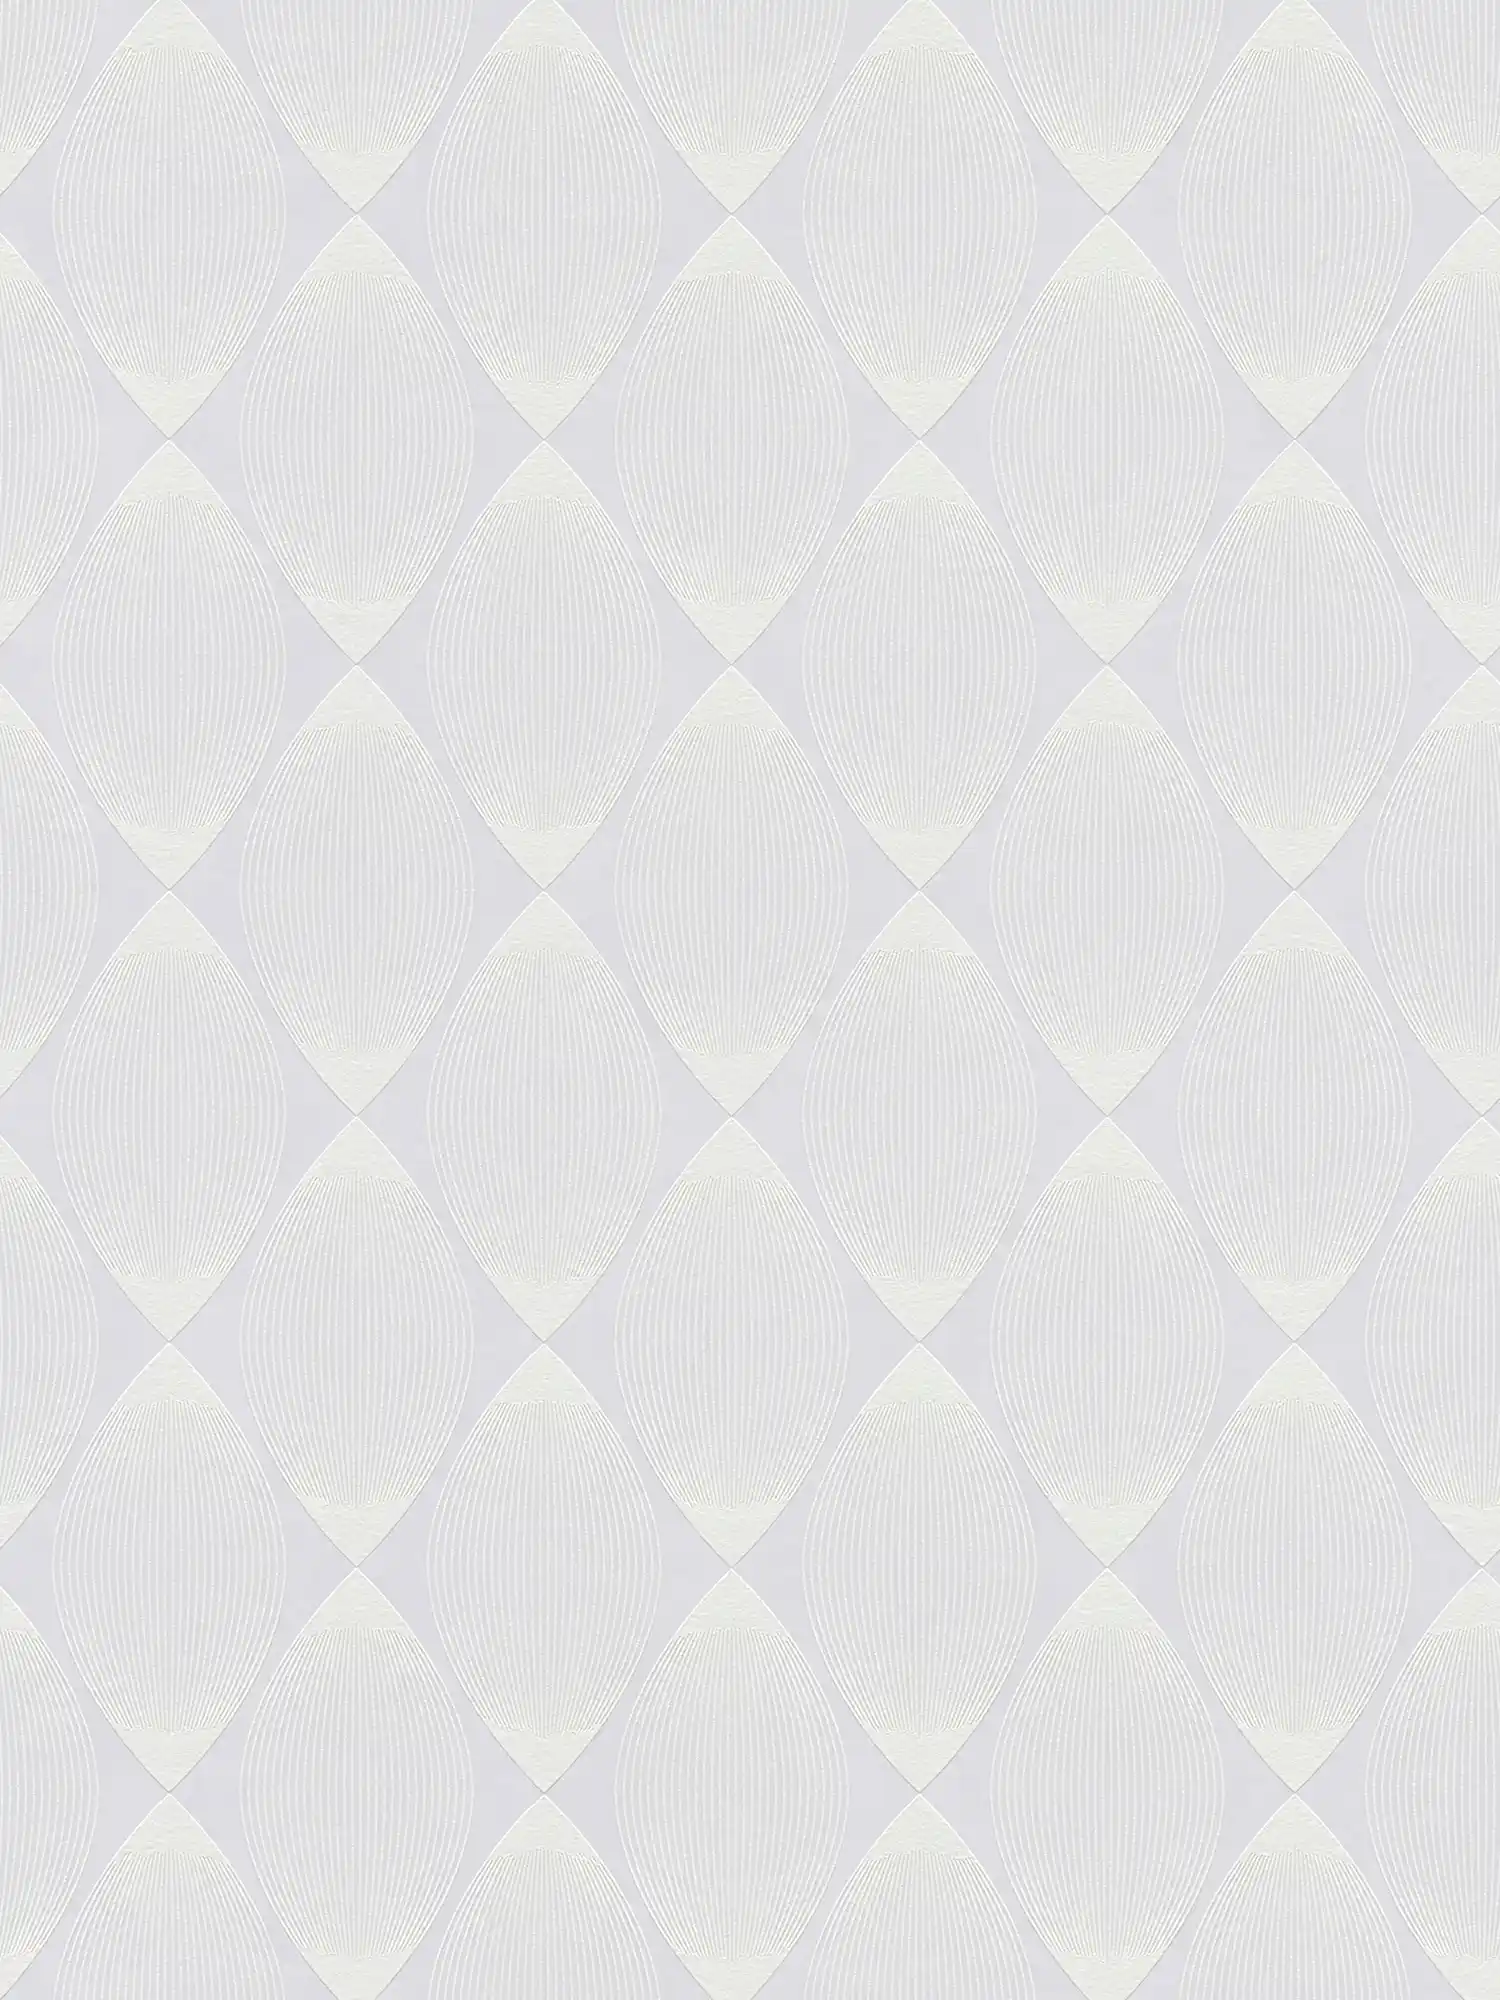 Paintable non-woven wallpaper with diamond pattern - Paintable
